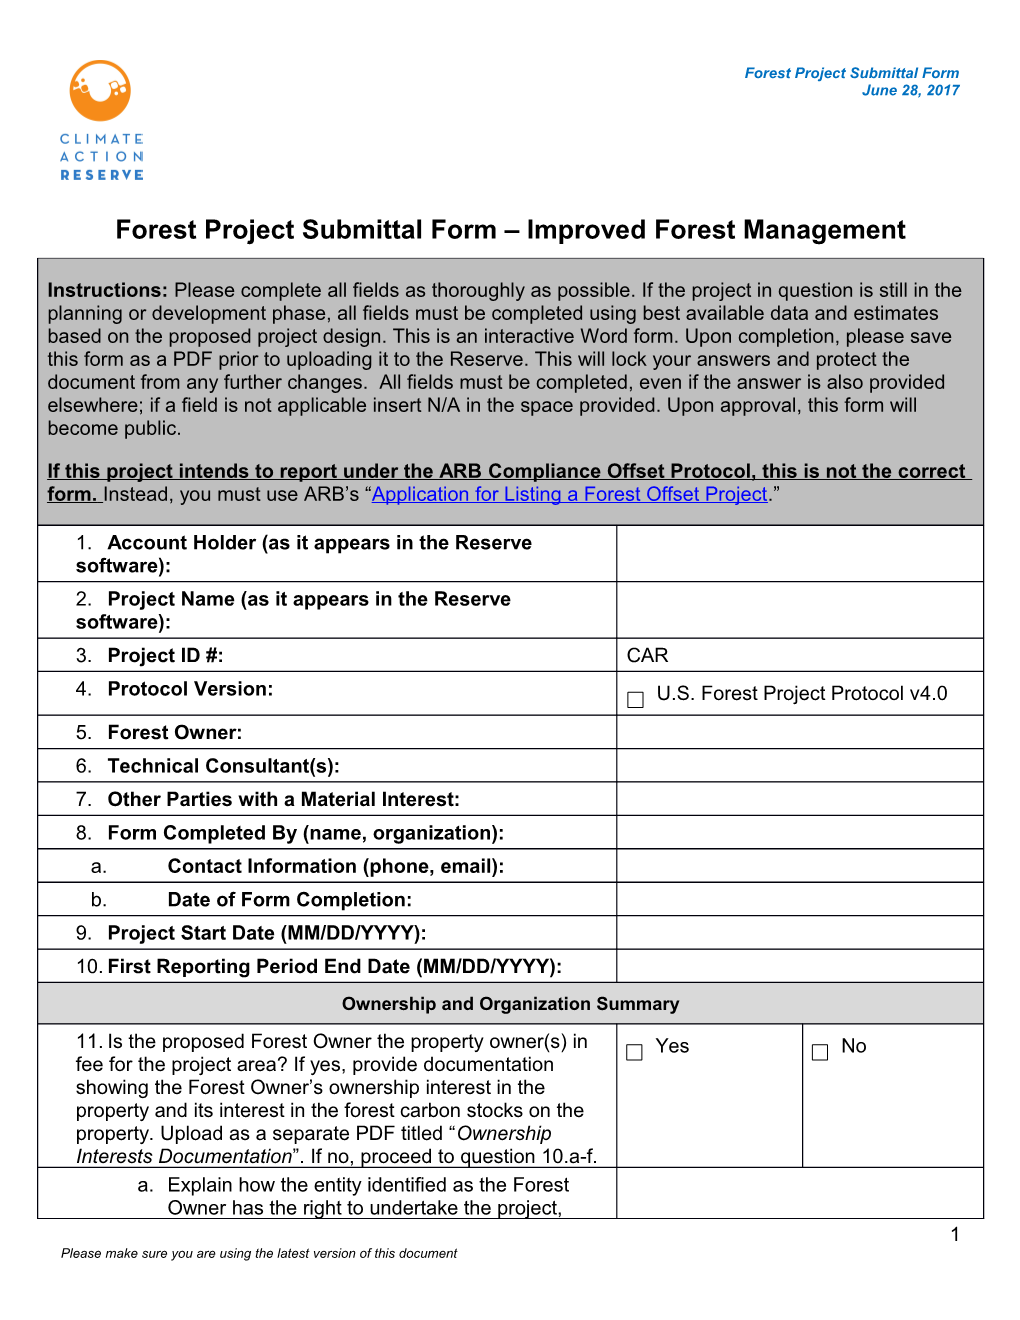 Forest Project Submittal Form Improved Forest Management